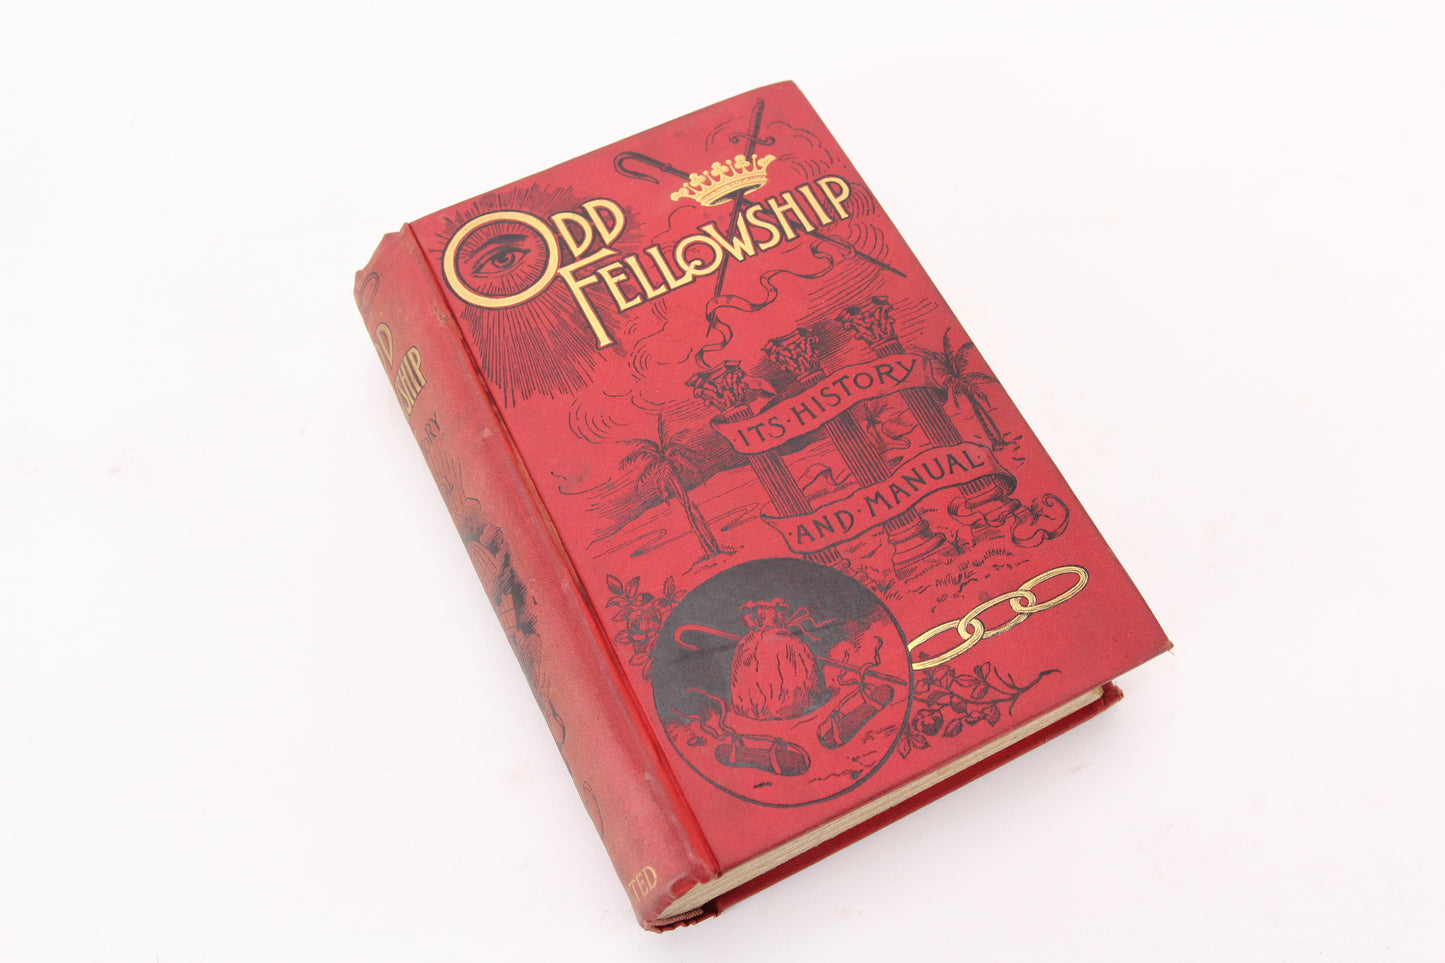 Odd Fellowship: Its History and Manual, by Theo A. Ross, Copyright 1887